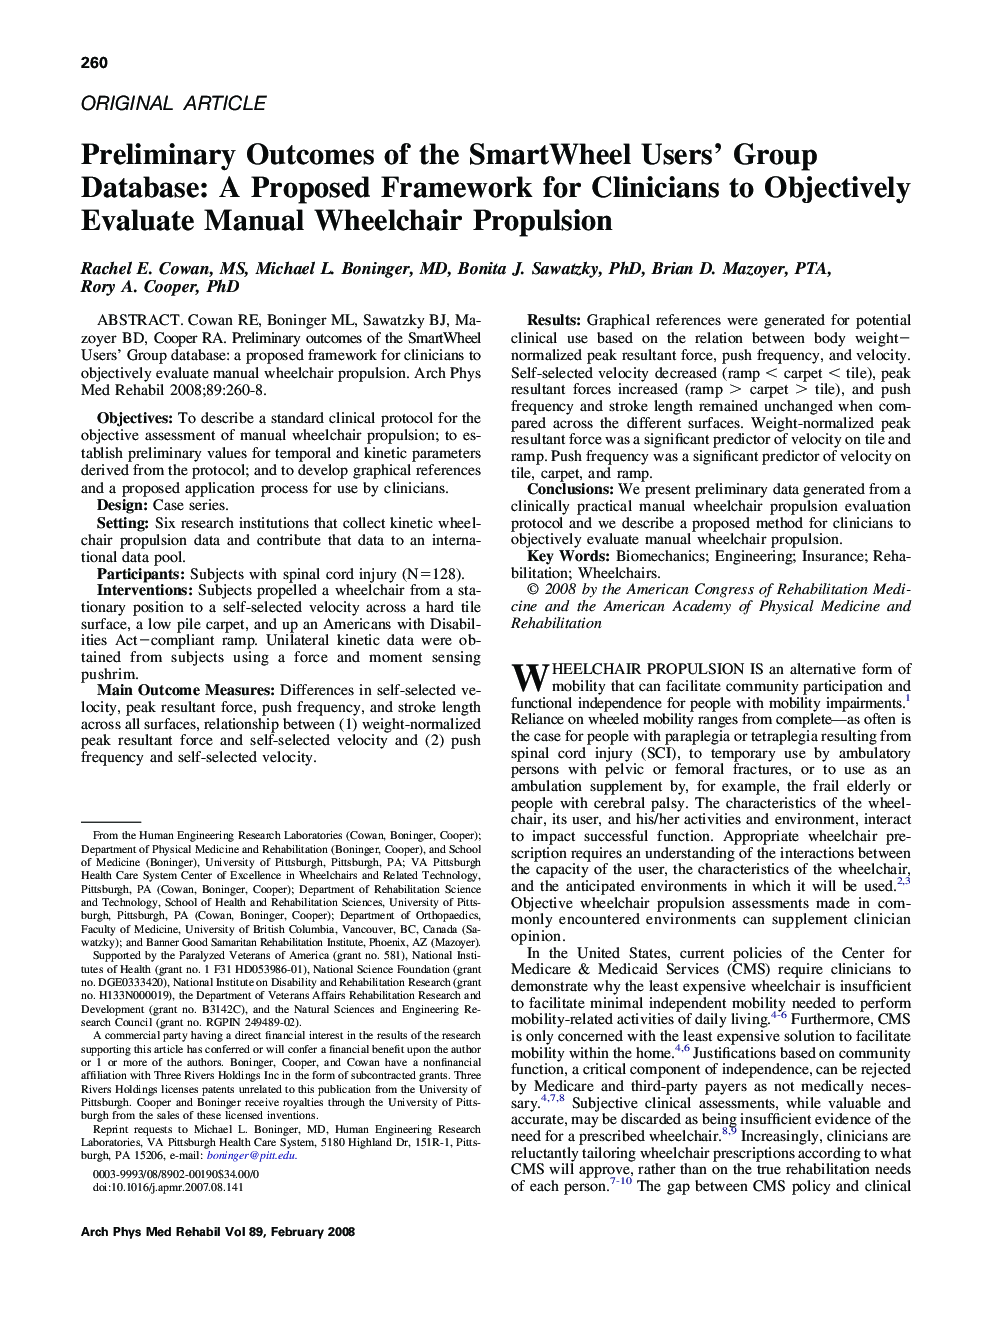 Preliminary Outcomes of the SmartWheel Users' Group Database: A Proposed Framework for Clinicians to Objectively Evaluate Manual Wheelchair Propulsion